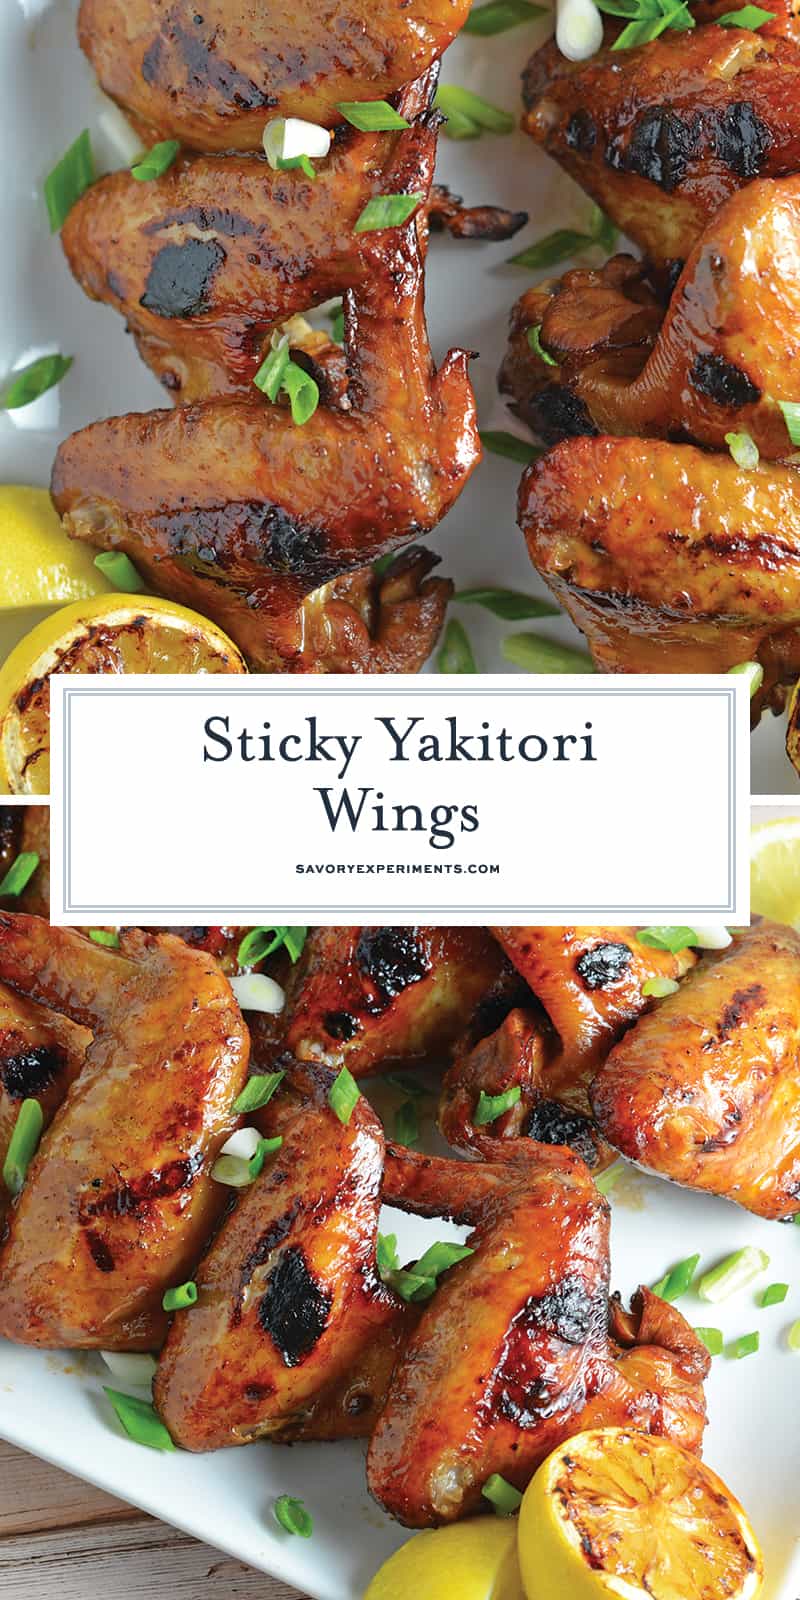 Easy Yakitori Chicken Recipe - a classic Japanese dish that uses only 5 ingredients for a sweet and savory simple marinade. Make chicken on the grill or bake in the oven! #yakitorichicken #grilledchicken www.savoryexperiments.com